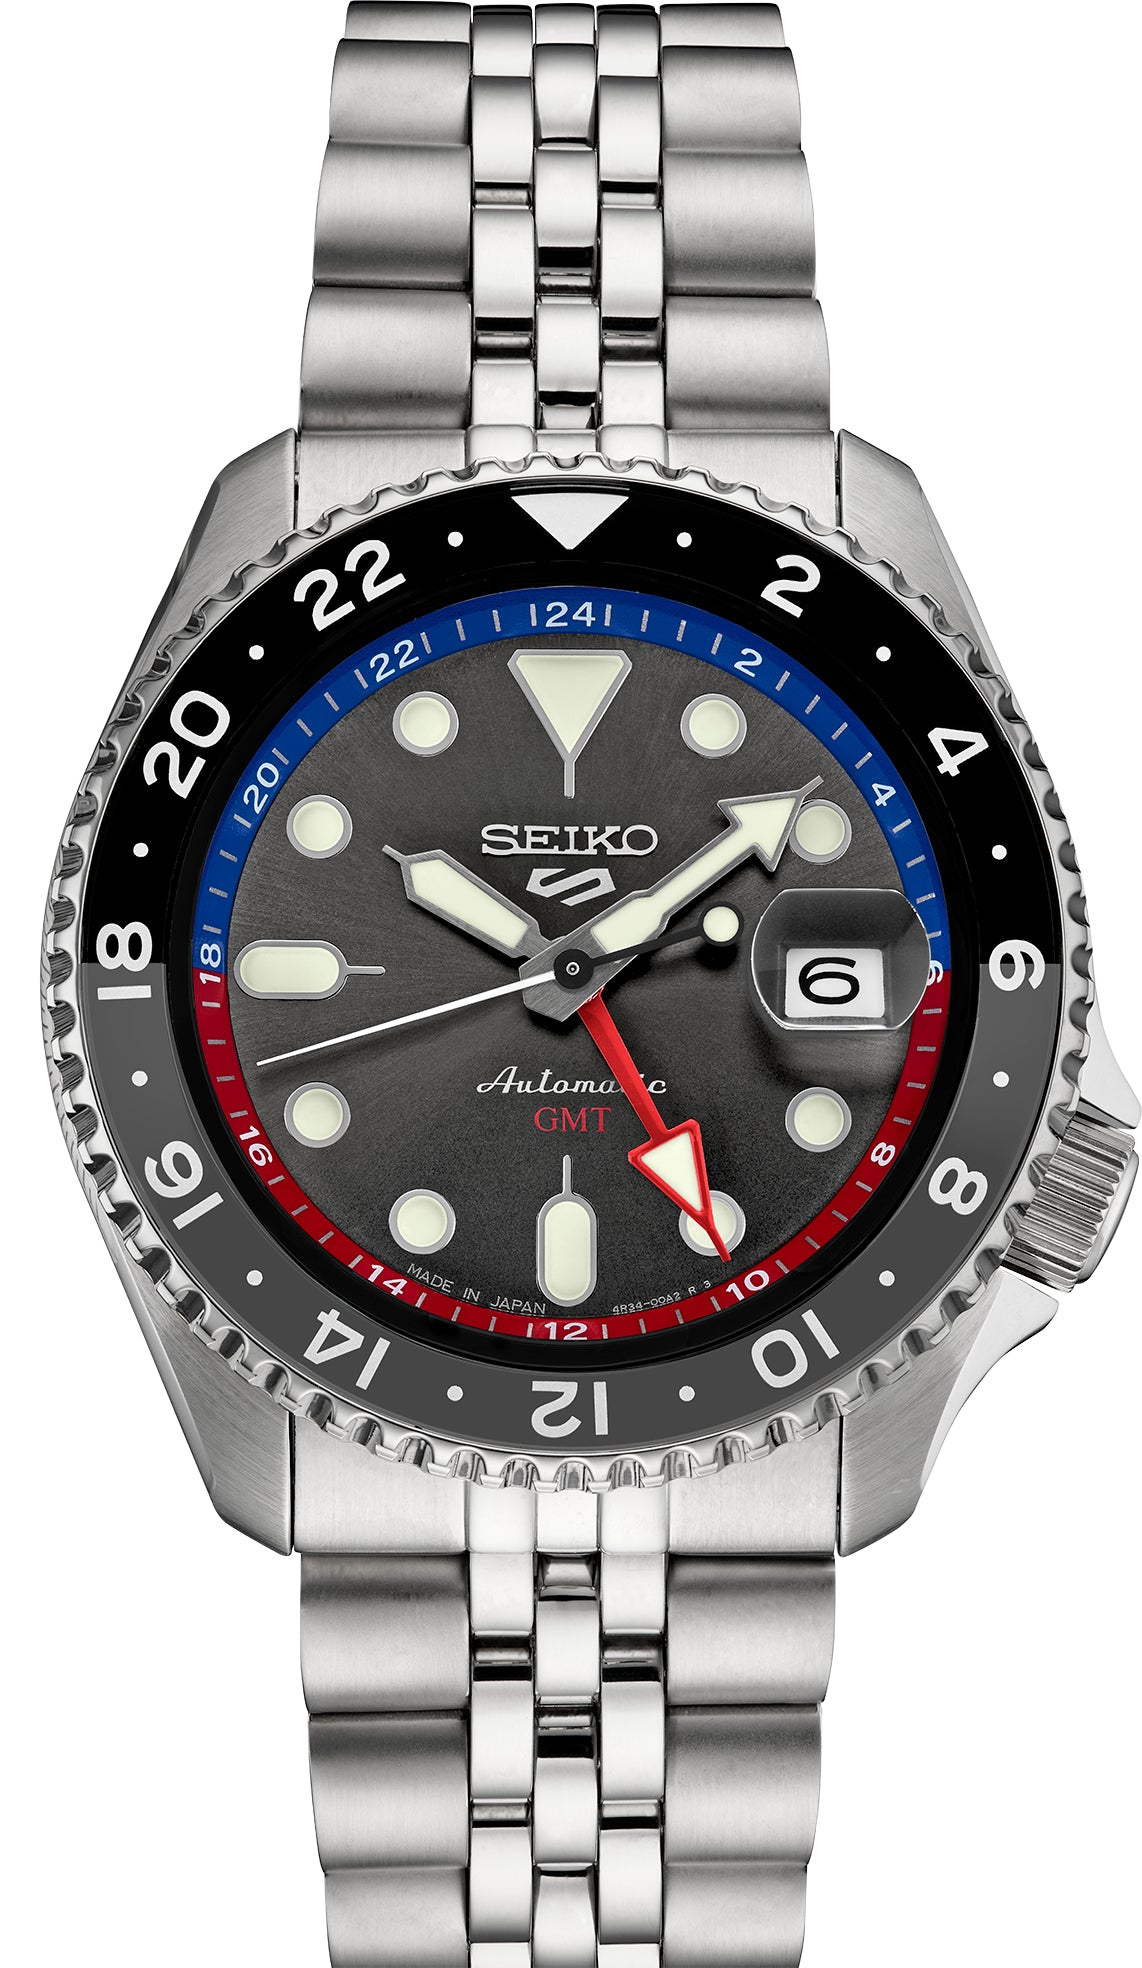 Gts Seiko Automatic GMT Charcoal Dial with Blue and Red Accents Watch